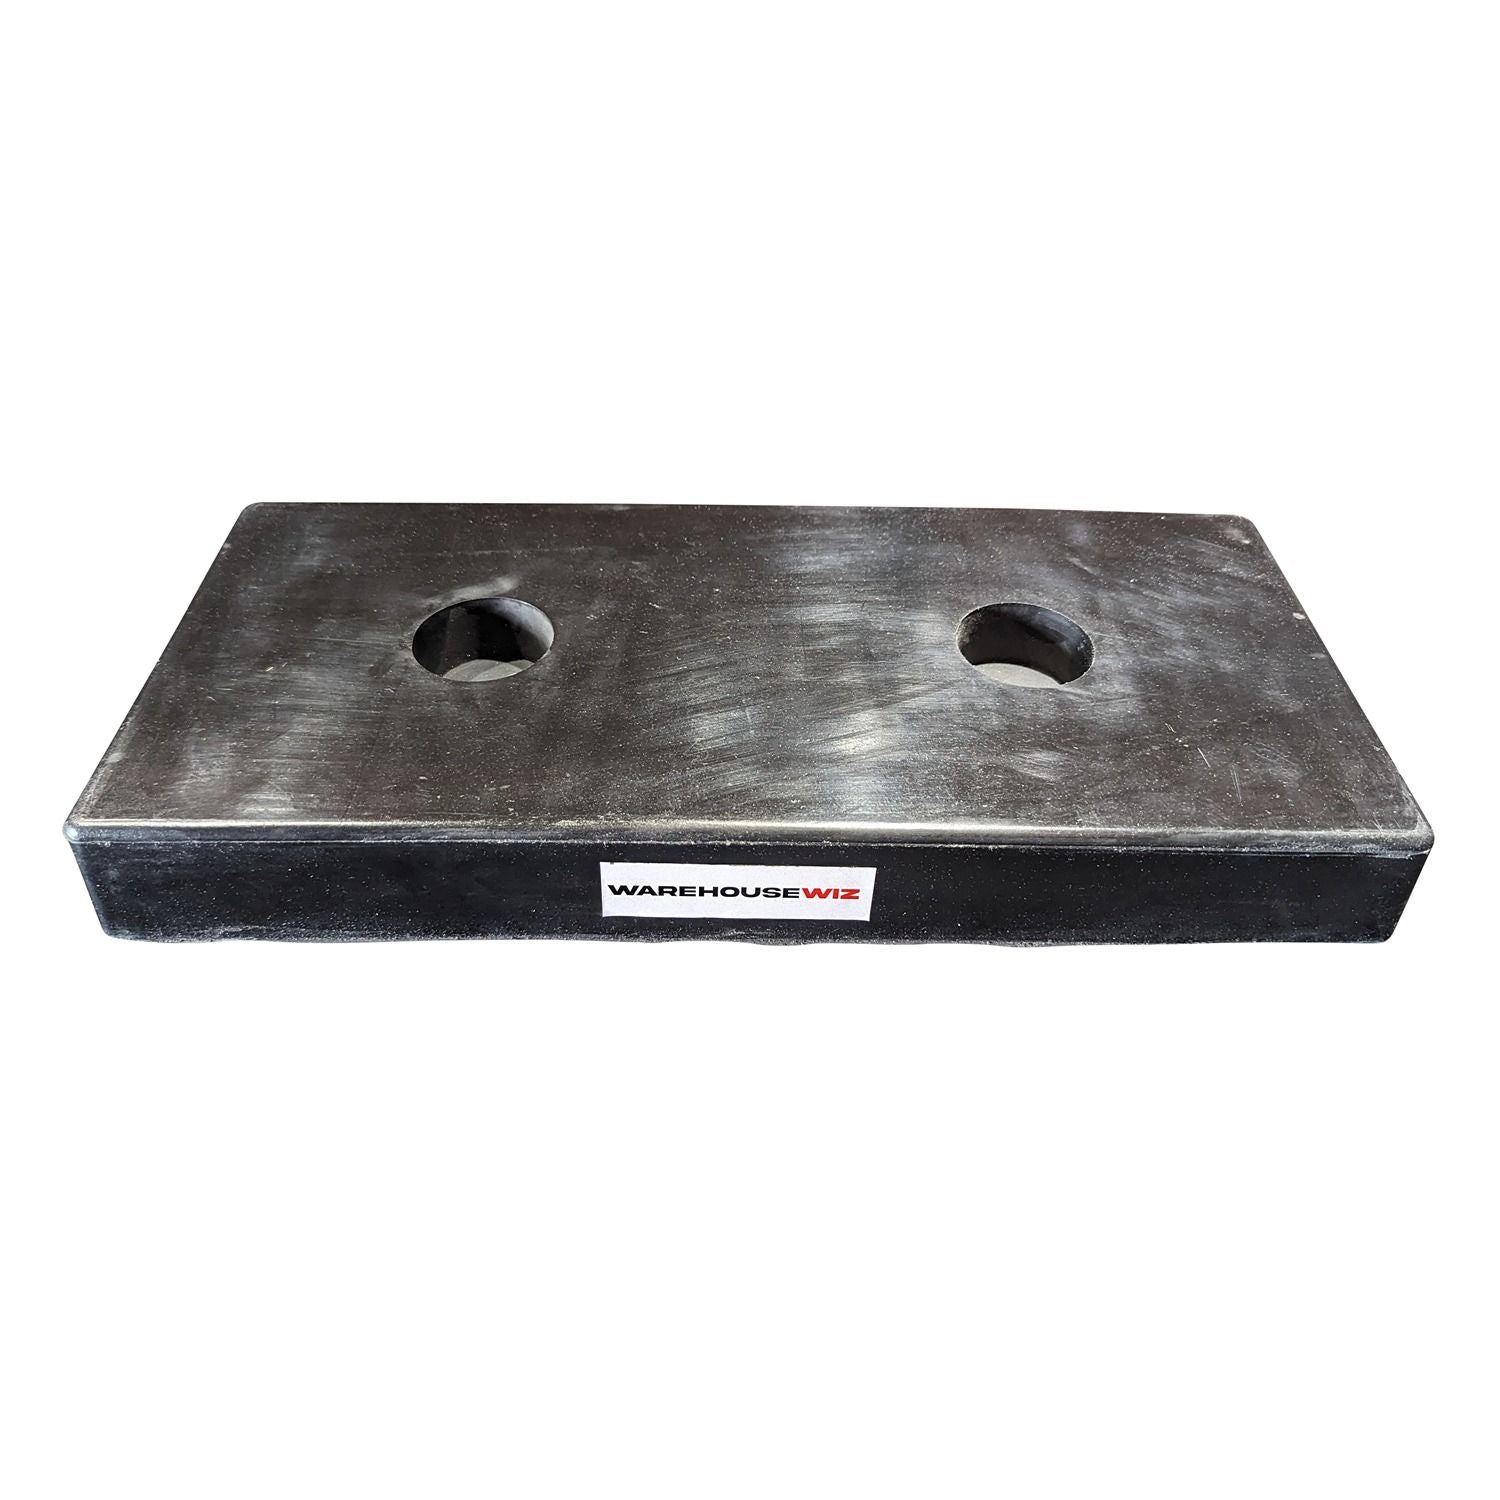 Molded dock bumper for warehouse use